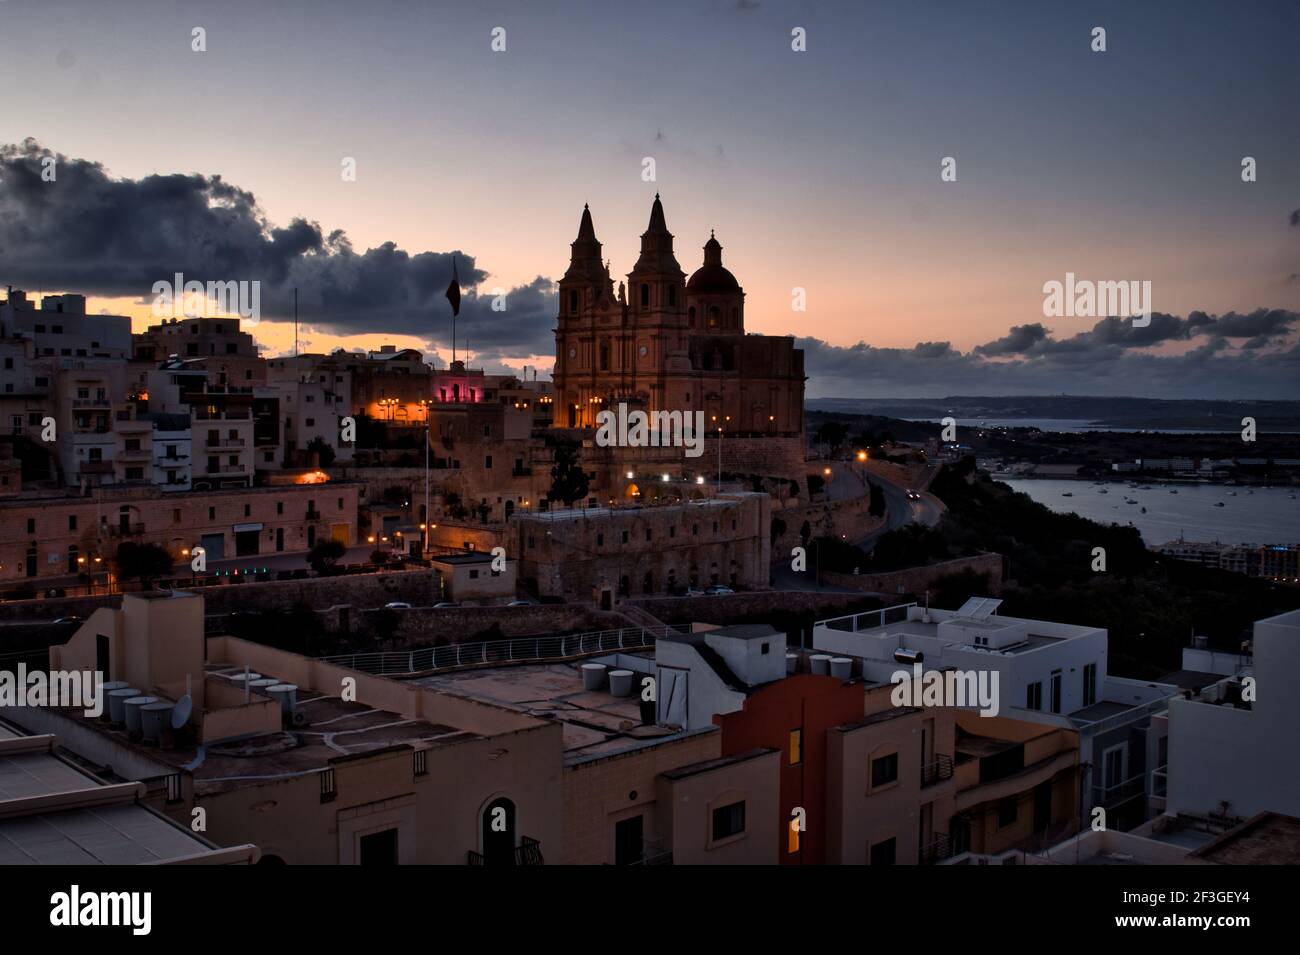 Historic white buildings and Parish Church in Mellieha, Malta lit up at night. Stock Photo